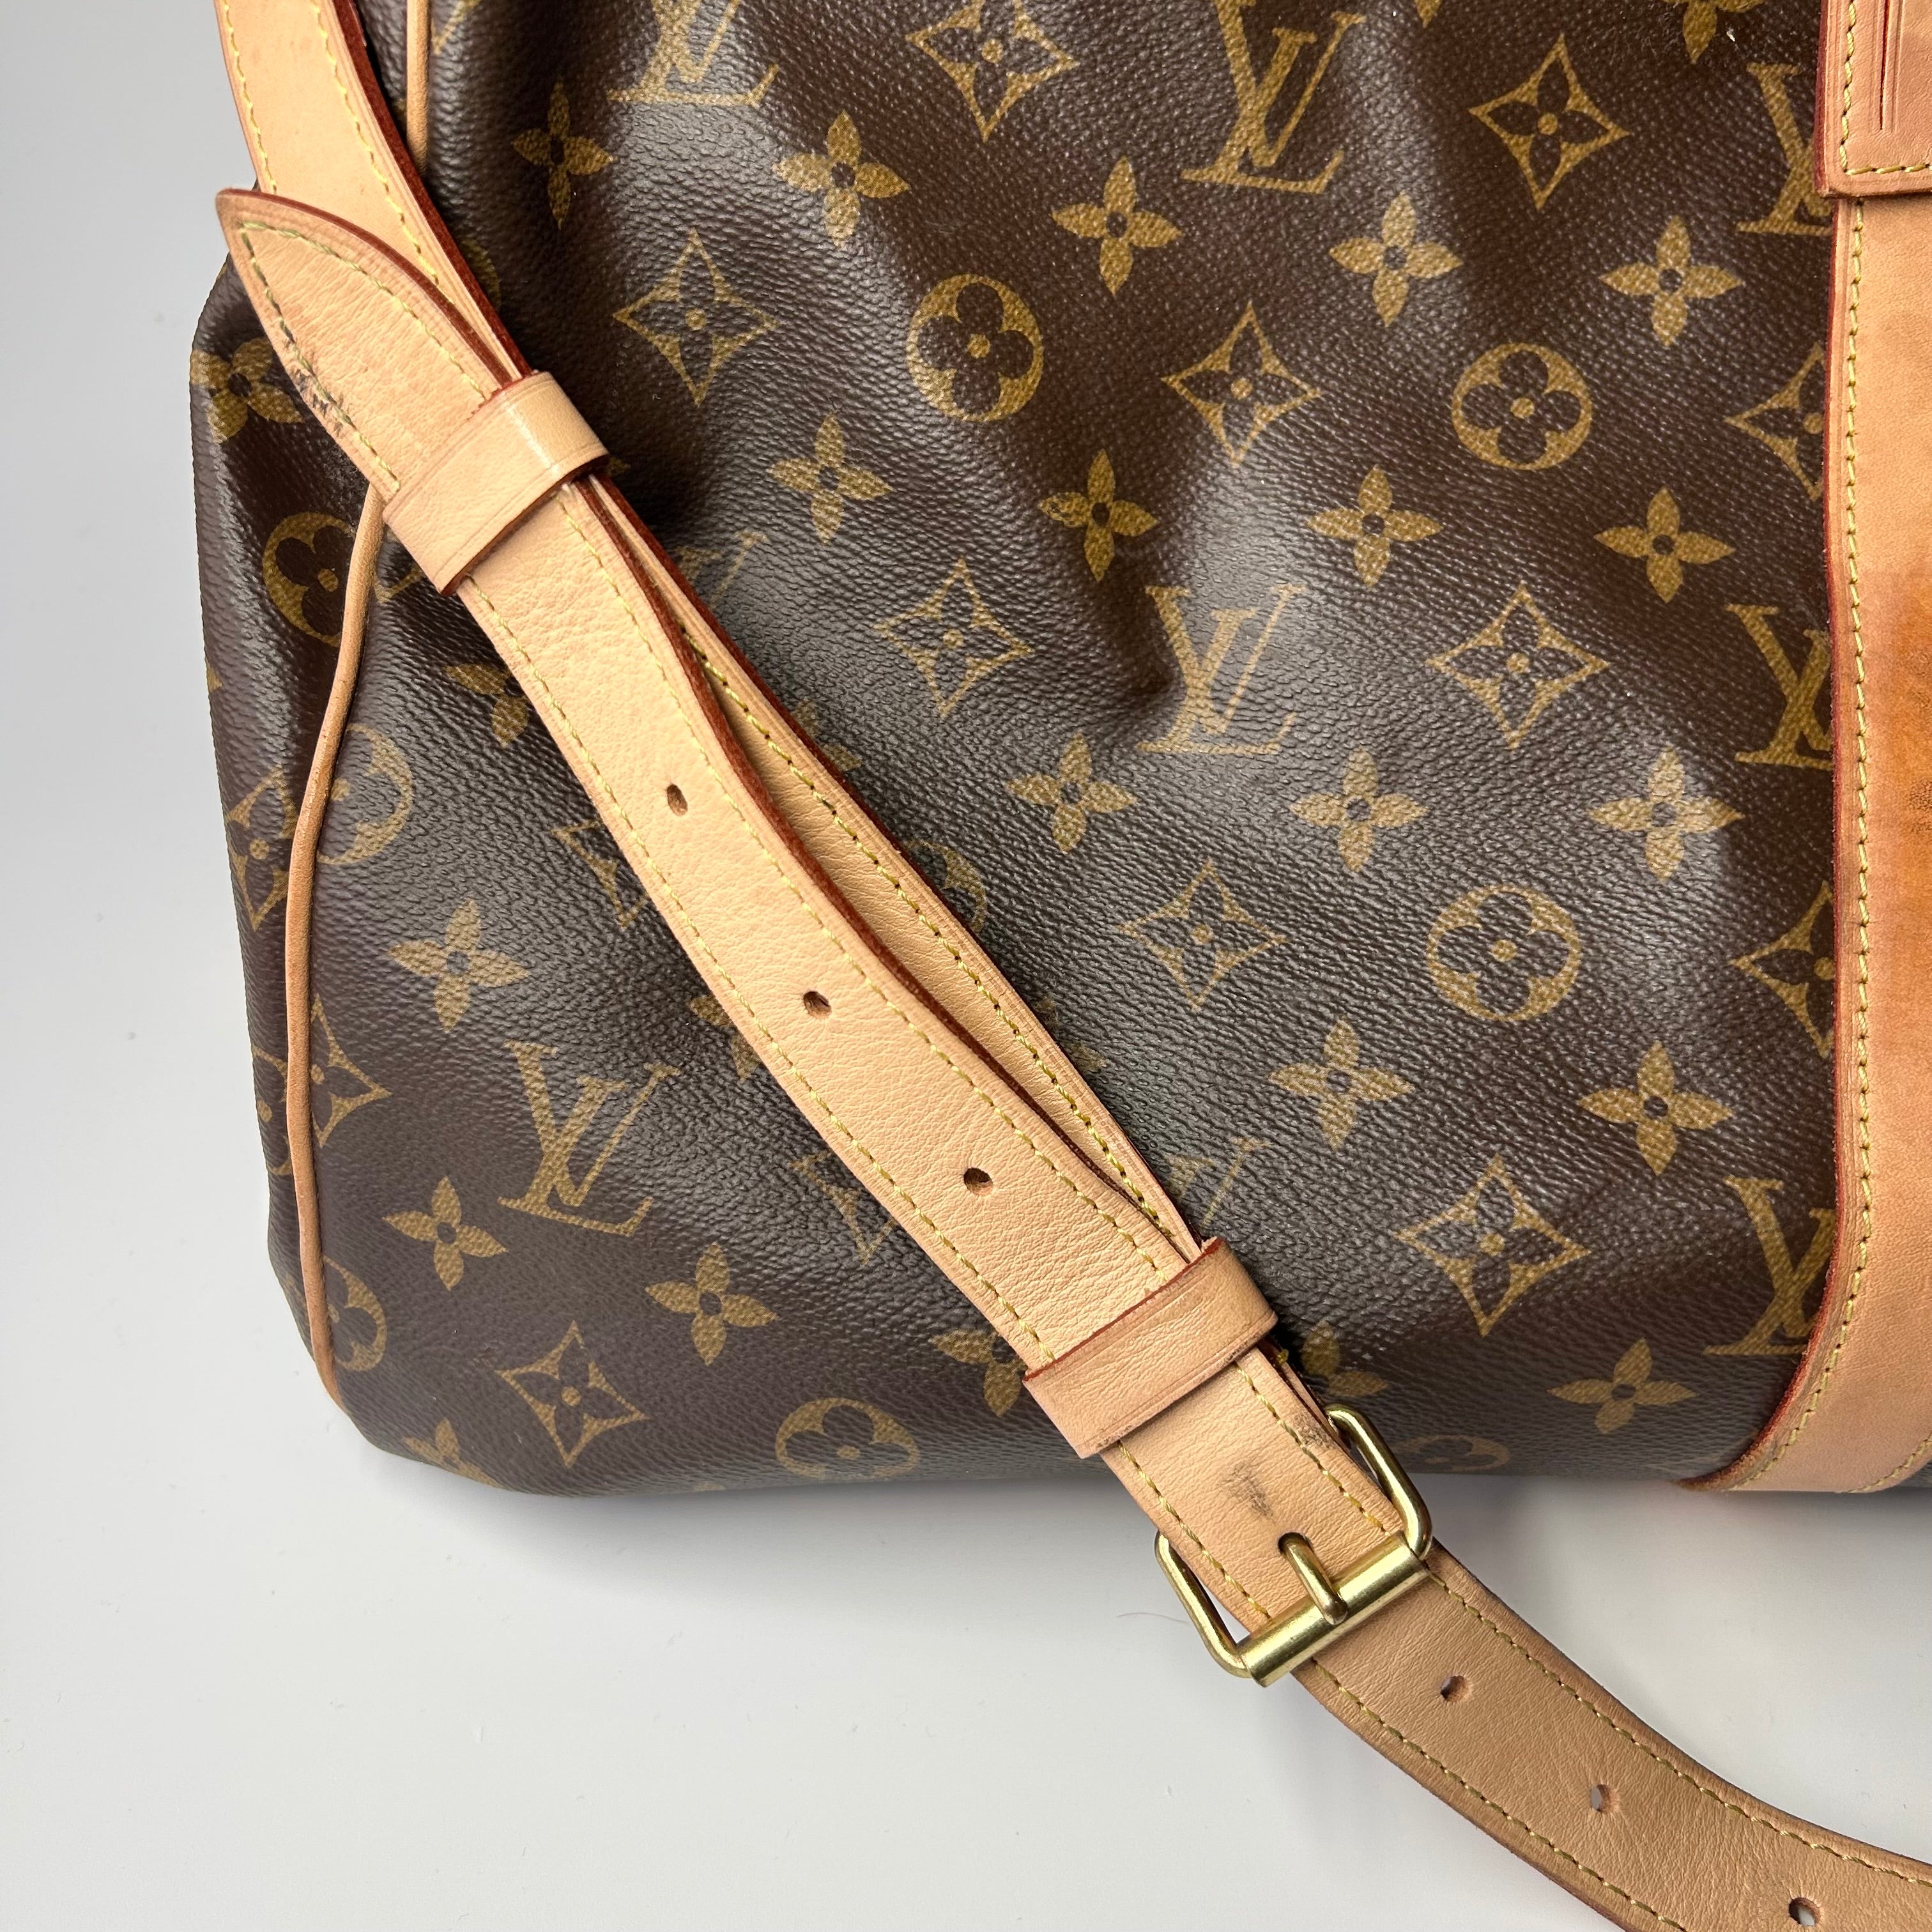 Louis Vuitton Keepall Bandouliere with Acetate Chain 55 Monogram